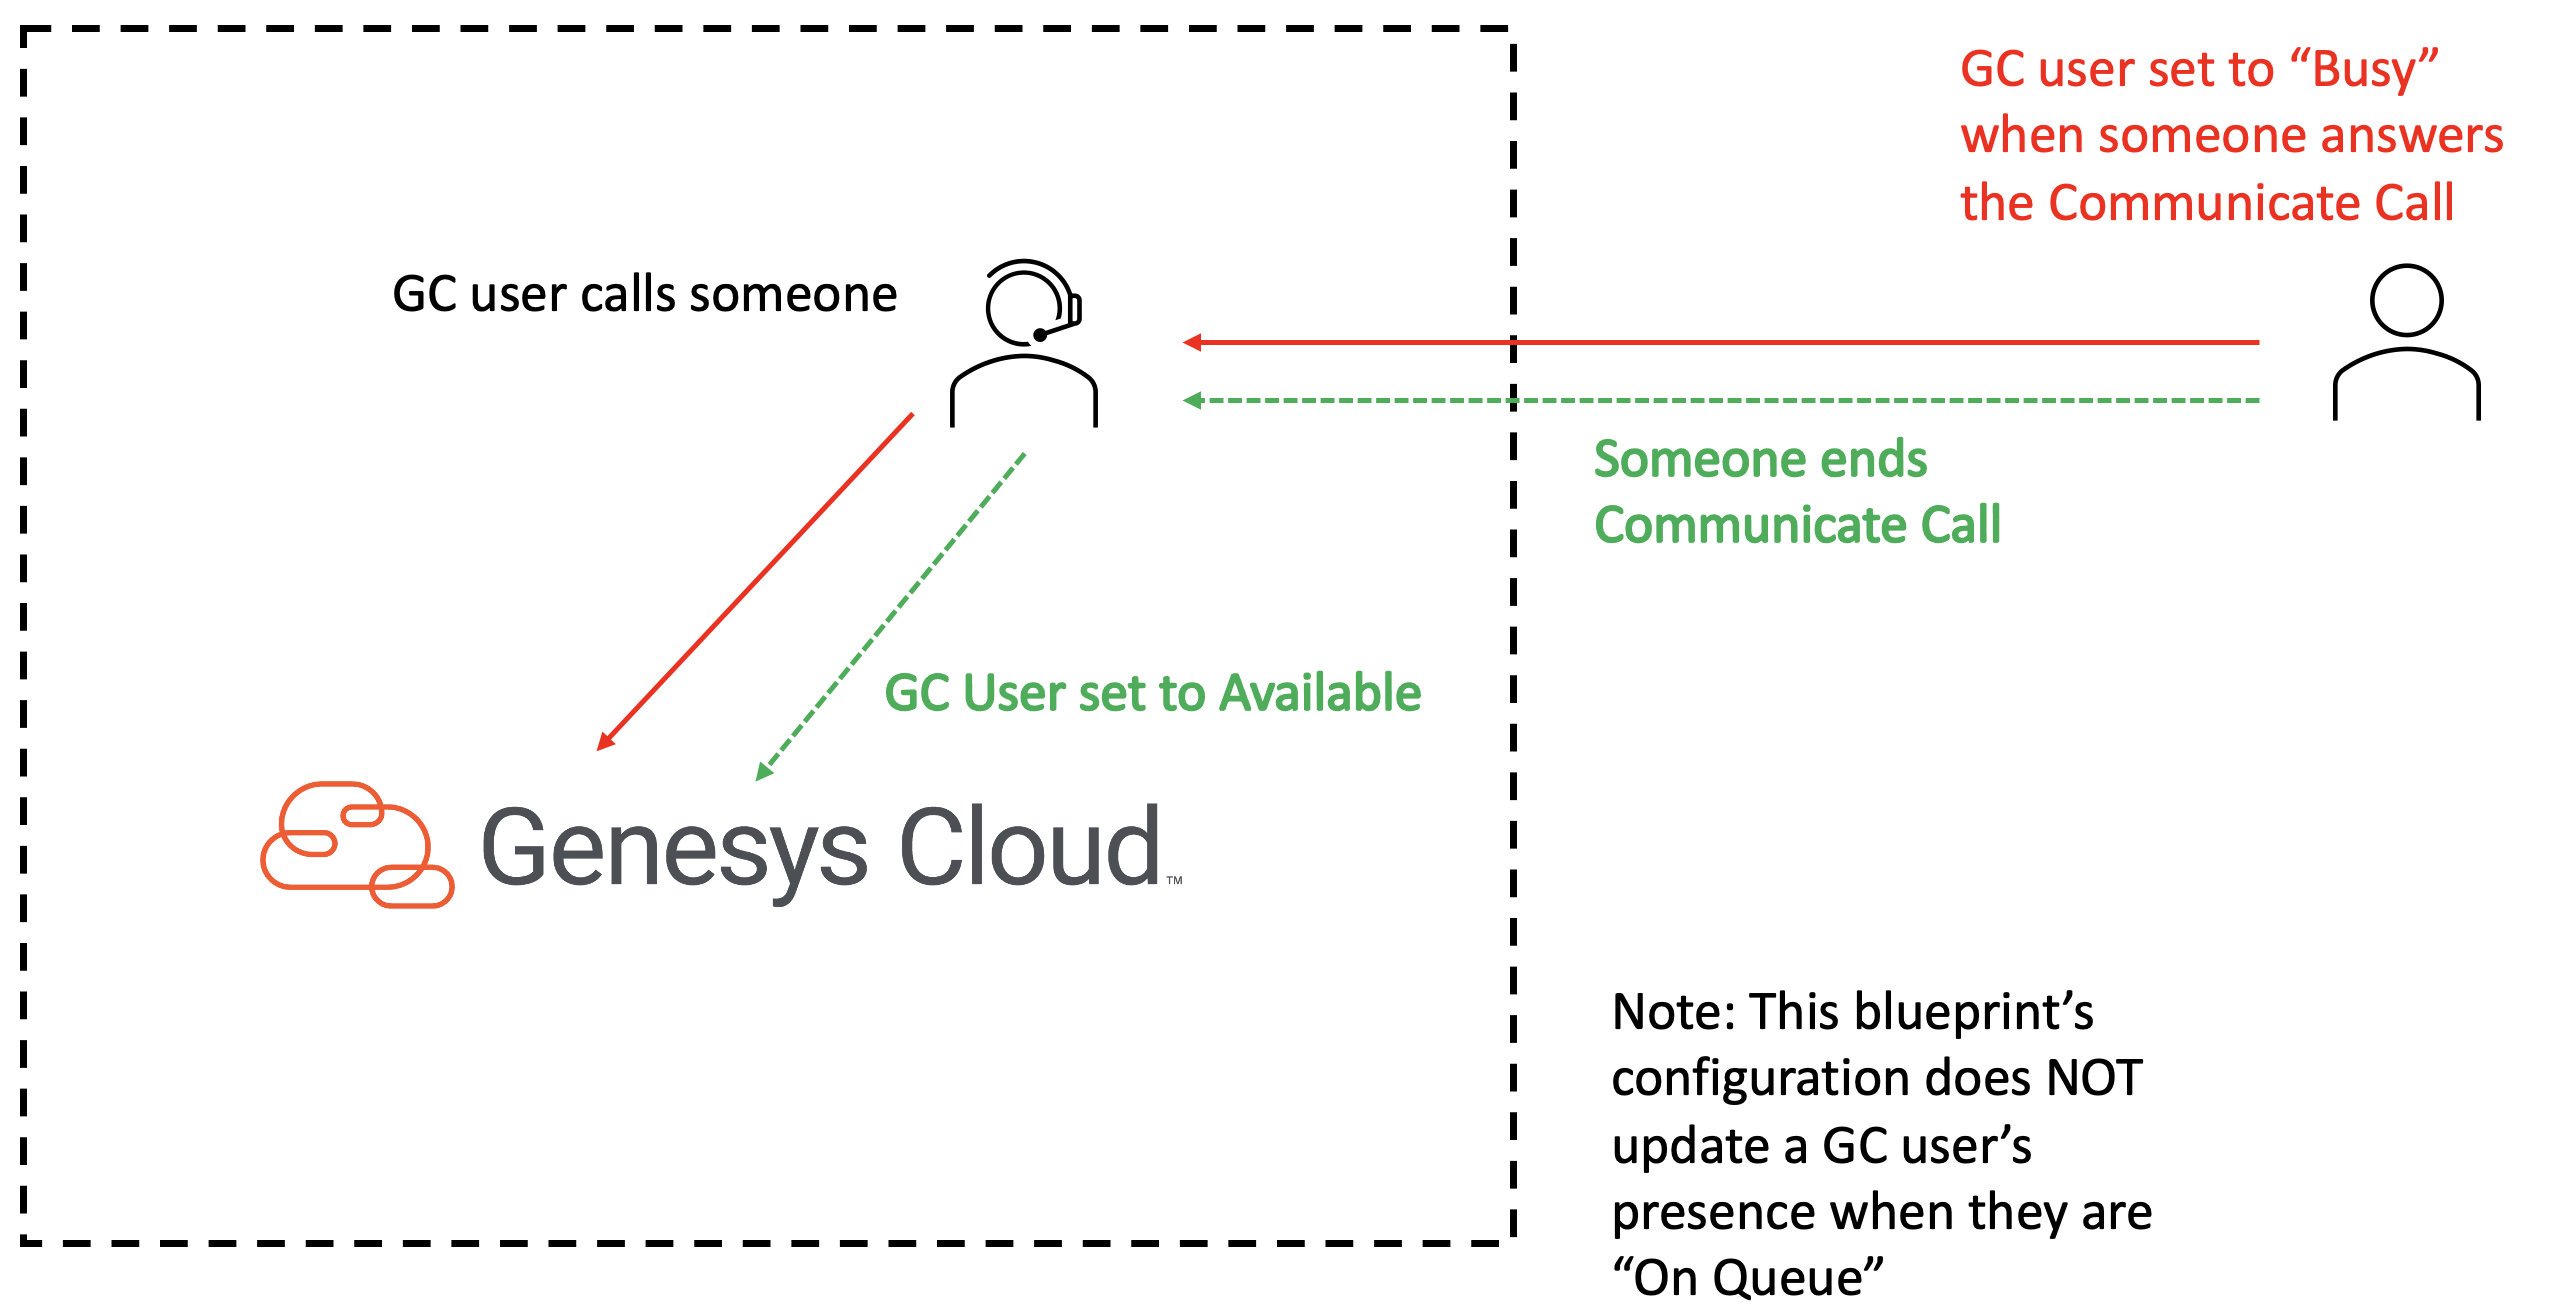 Outbound Communicate Call Genesys Cloud user presence flow